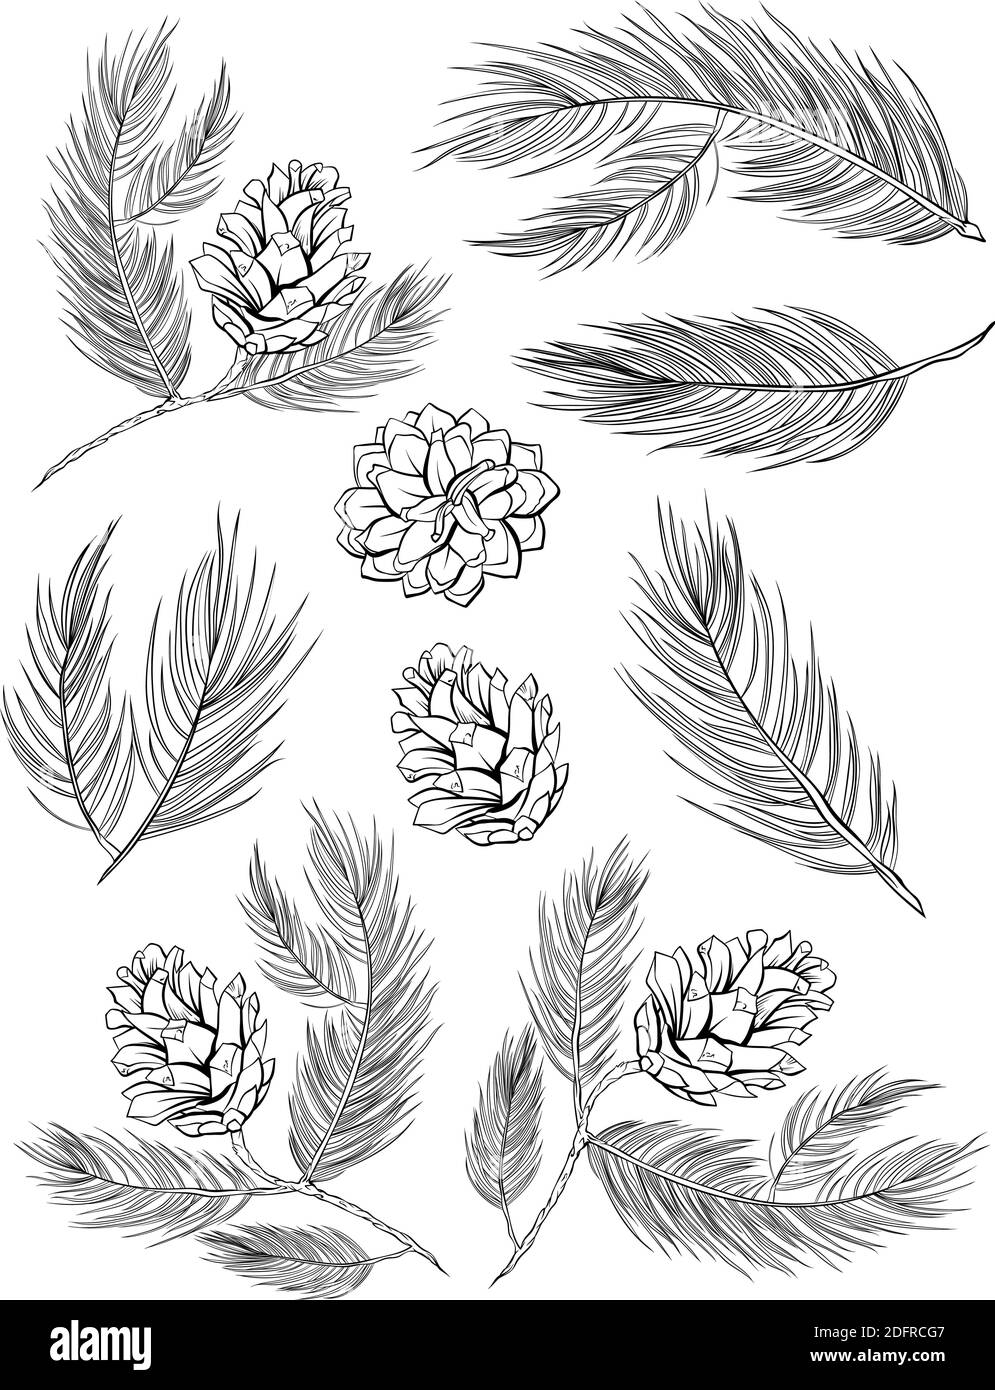 Pine cones, fir branches with pinecones, vector fir tree set of decoration elements. Fir cones, pine or cedar spruce branches black and white isolated line art set for Christmas Xmas decoration design Stock Vector